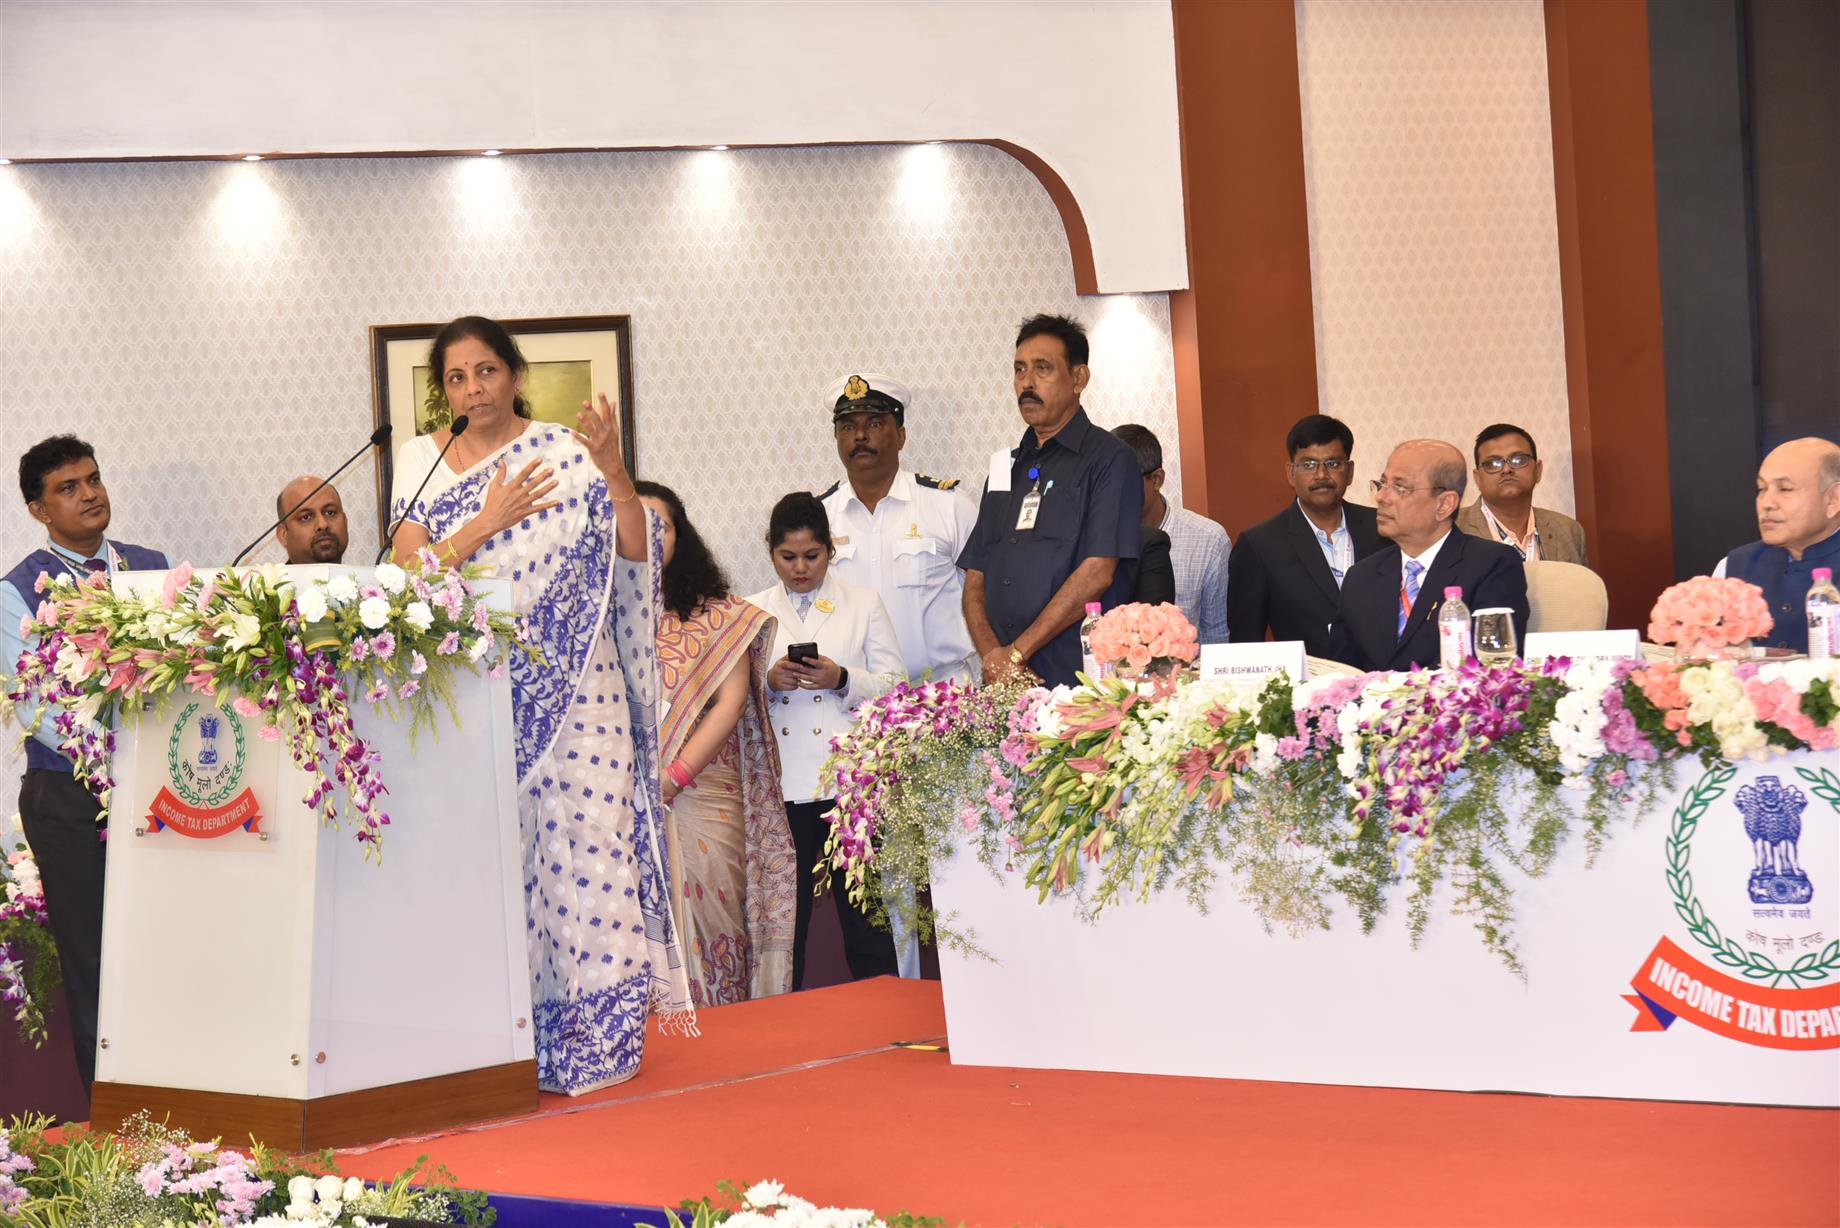 Union Finance Minister, Smt. Nirmala Sitharaman  speaking at the interractive session with officers of Department of Revenue in Kolkata on September 06, 2016.